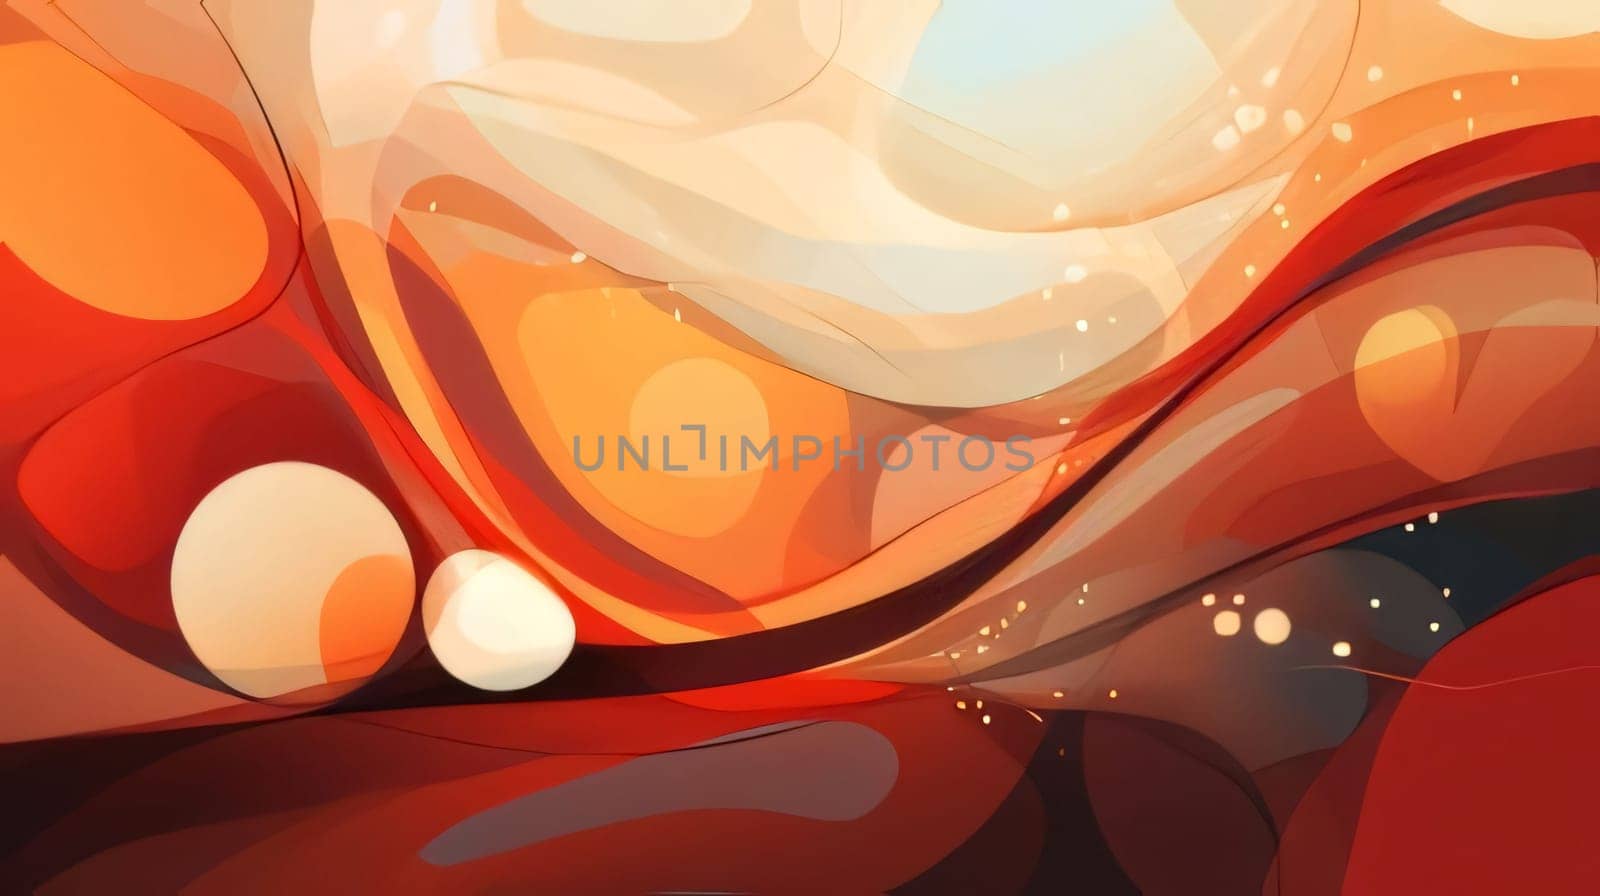 Abstract background design: abstract red background with circles and bokeh, vector illustration